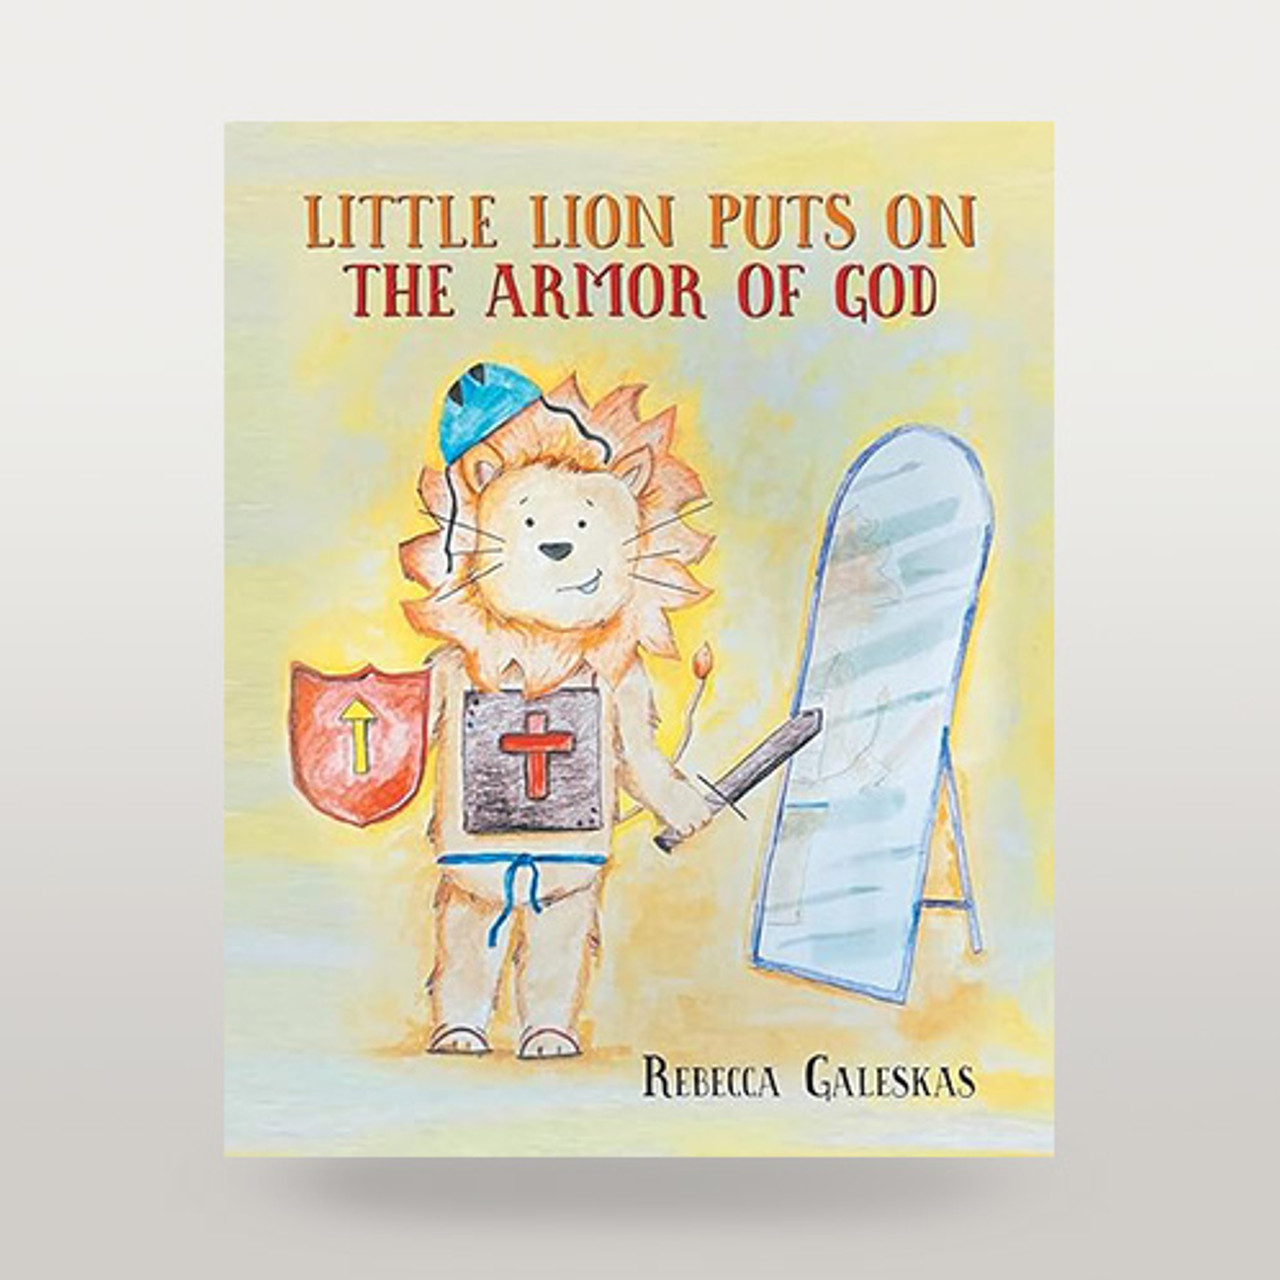 Little Lion Puts on the Armor of God- by Rebecca Galeskas